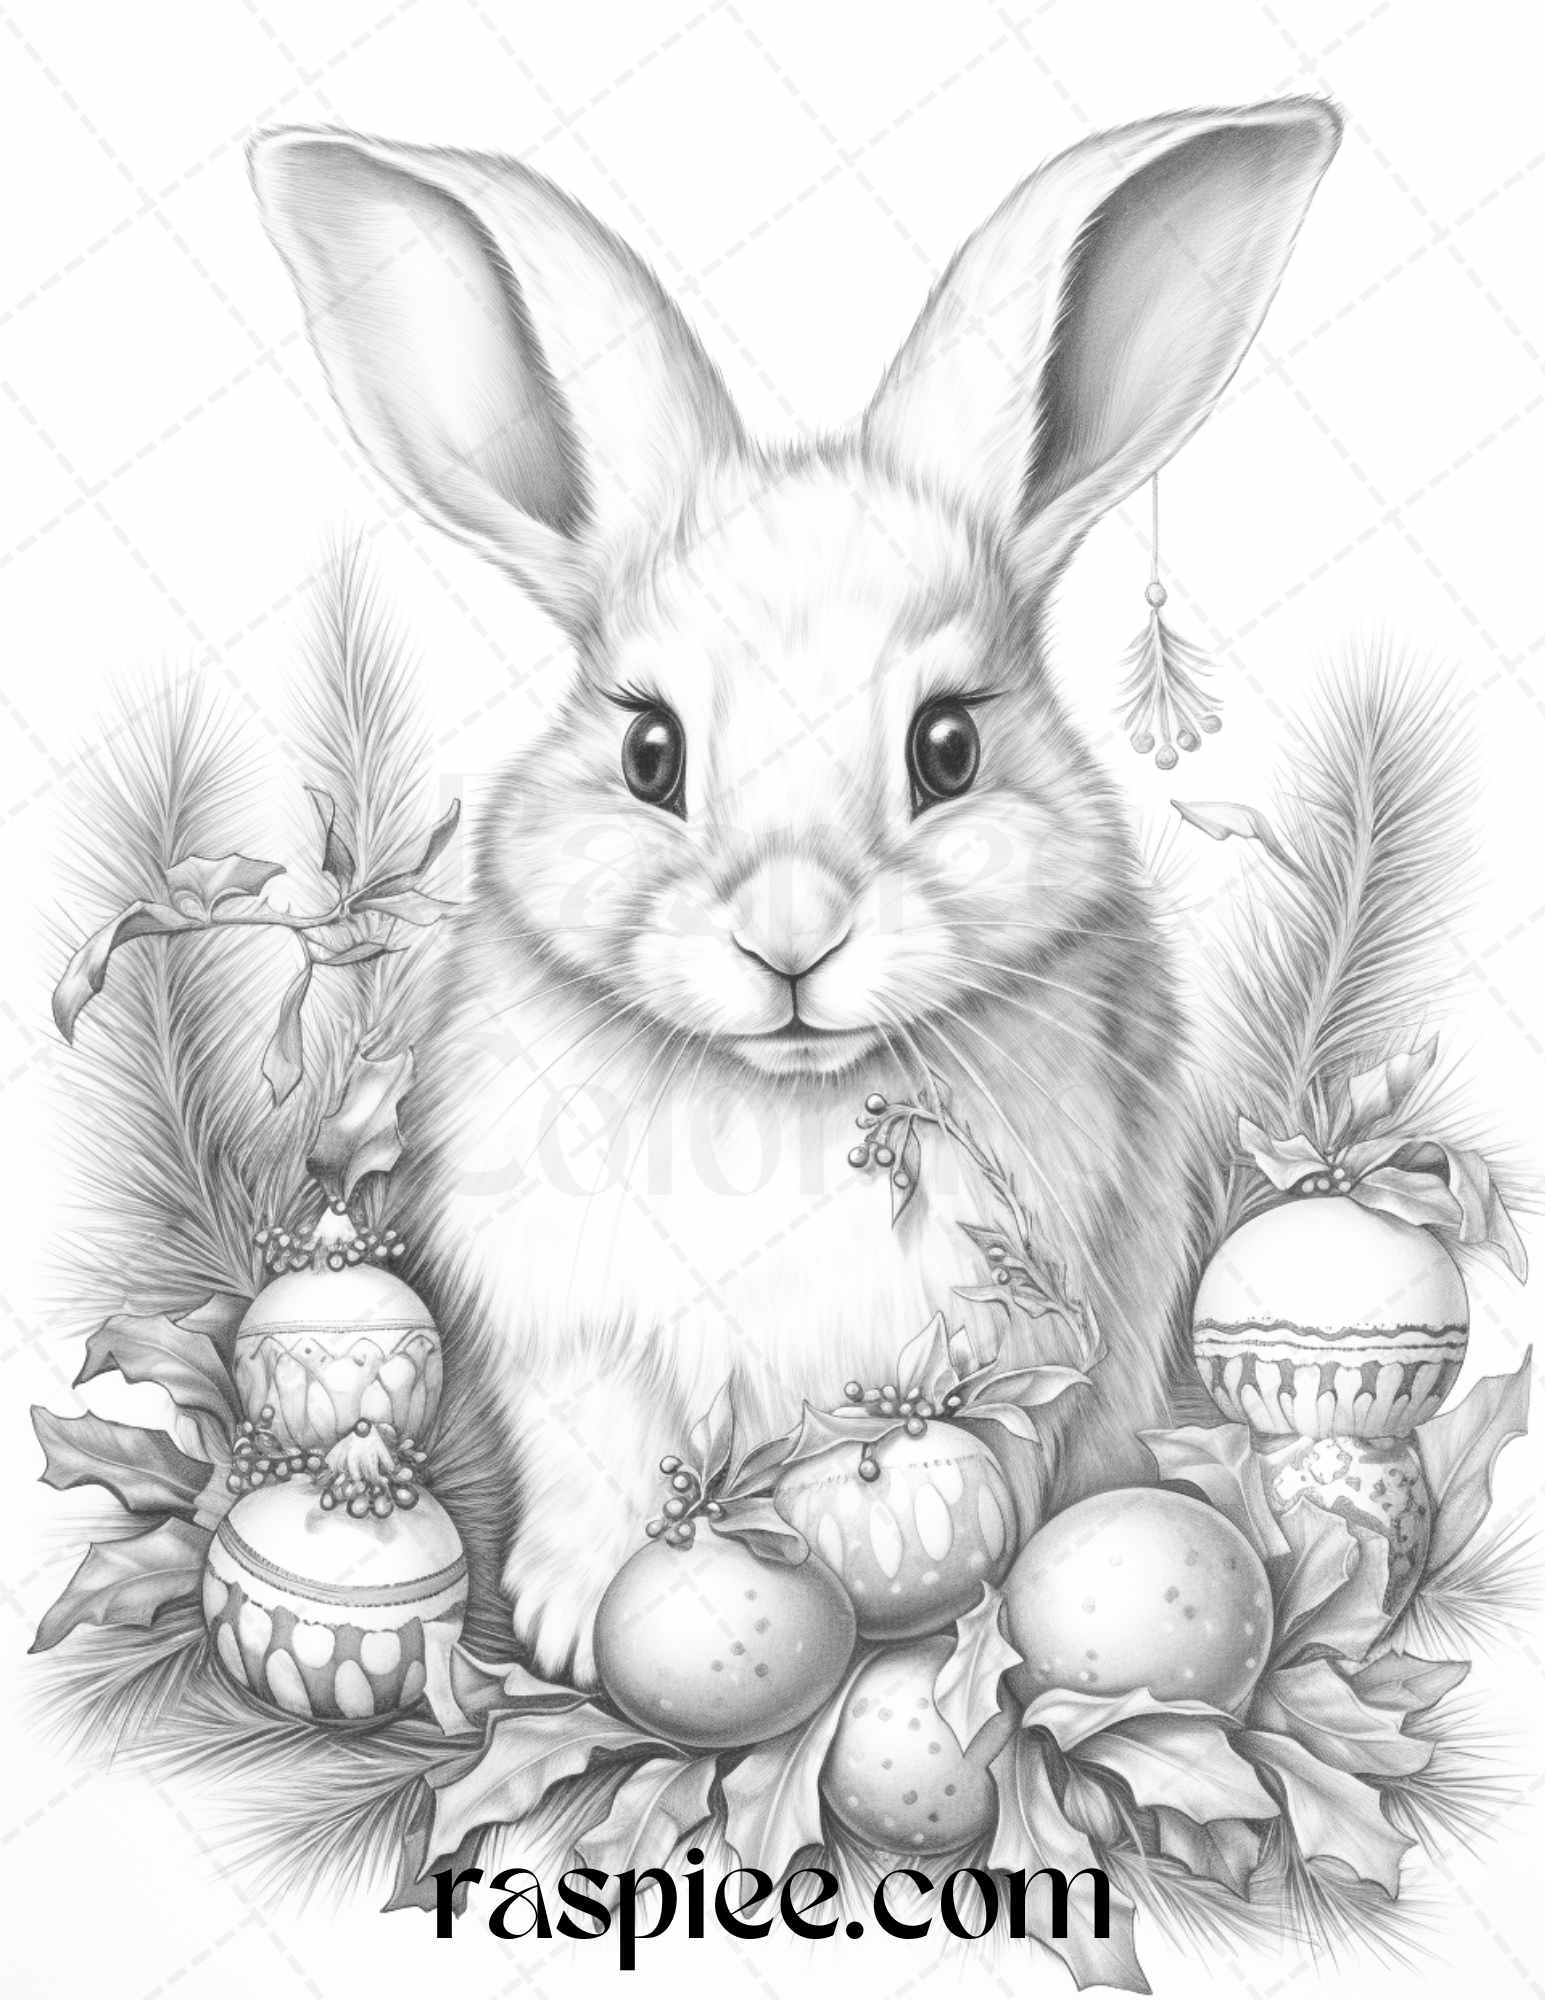 Christmas Animals Grayscale Coloring Pages, Adult Coloring Printable Images, Festive Illustrations for Adults, Xmas Animal Portraits, Stress-Relief Grayscale Art